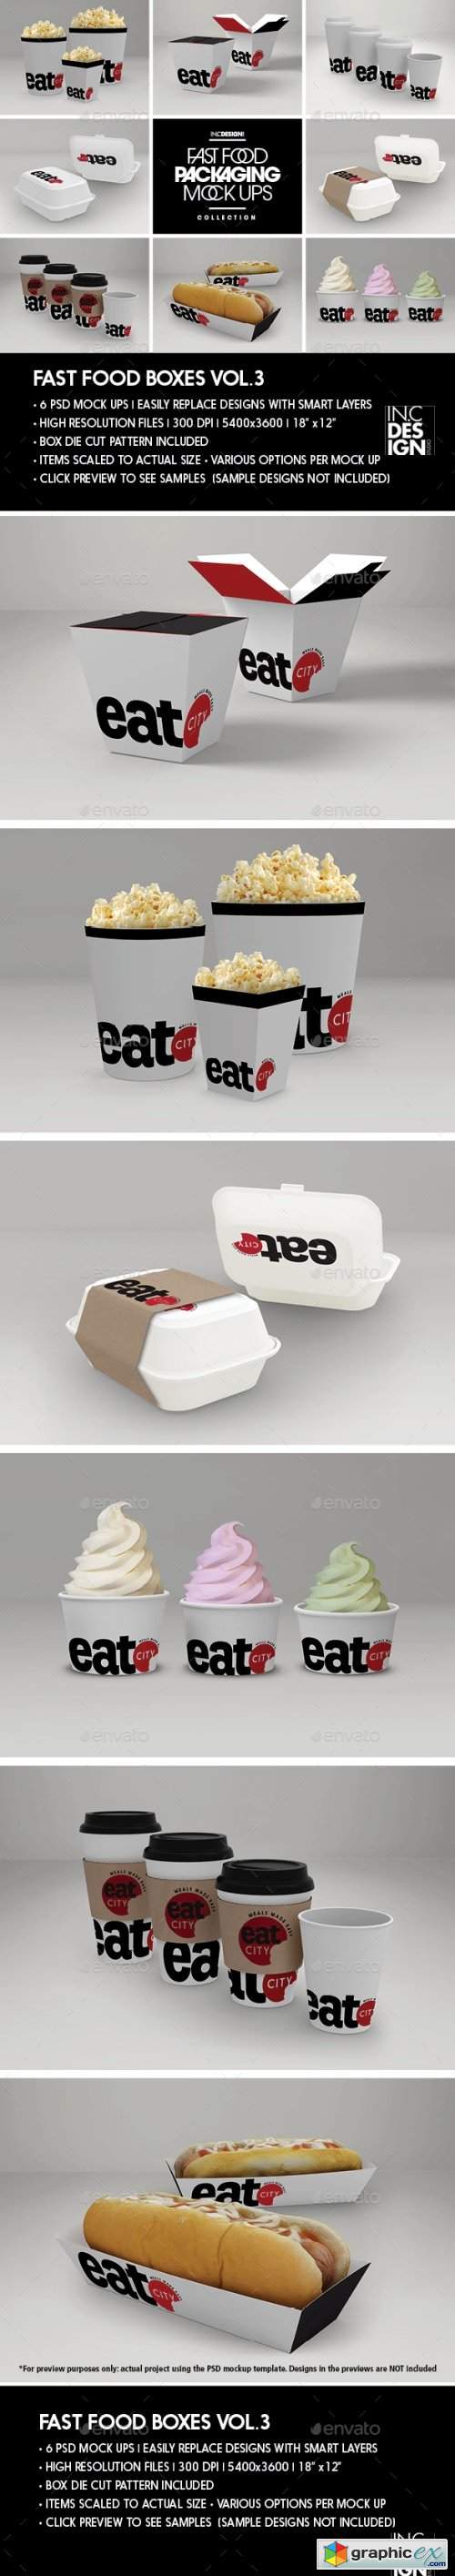 Fast Food Boxes Vol.3:Take Out Packaging Mock Ups